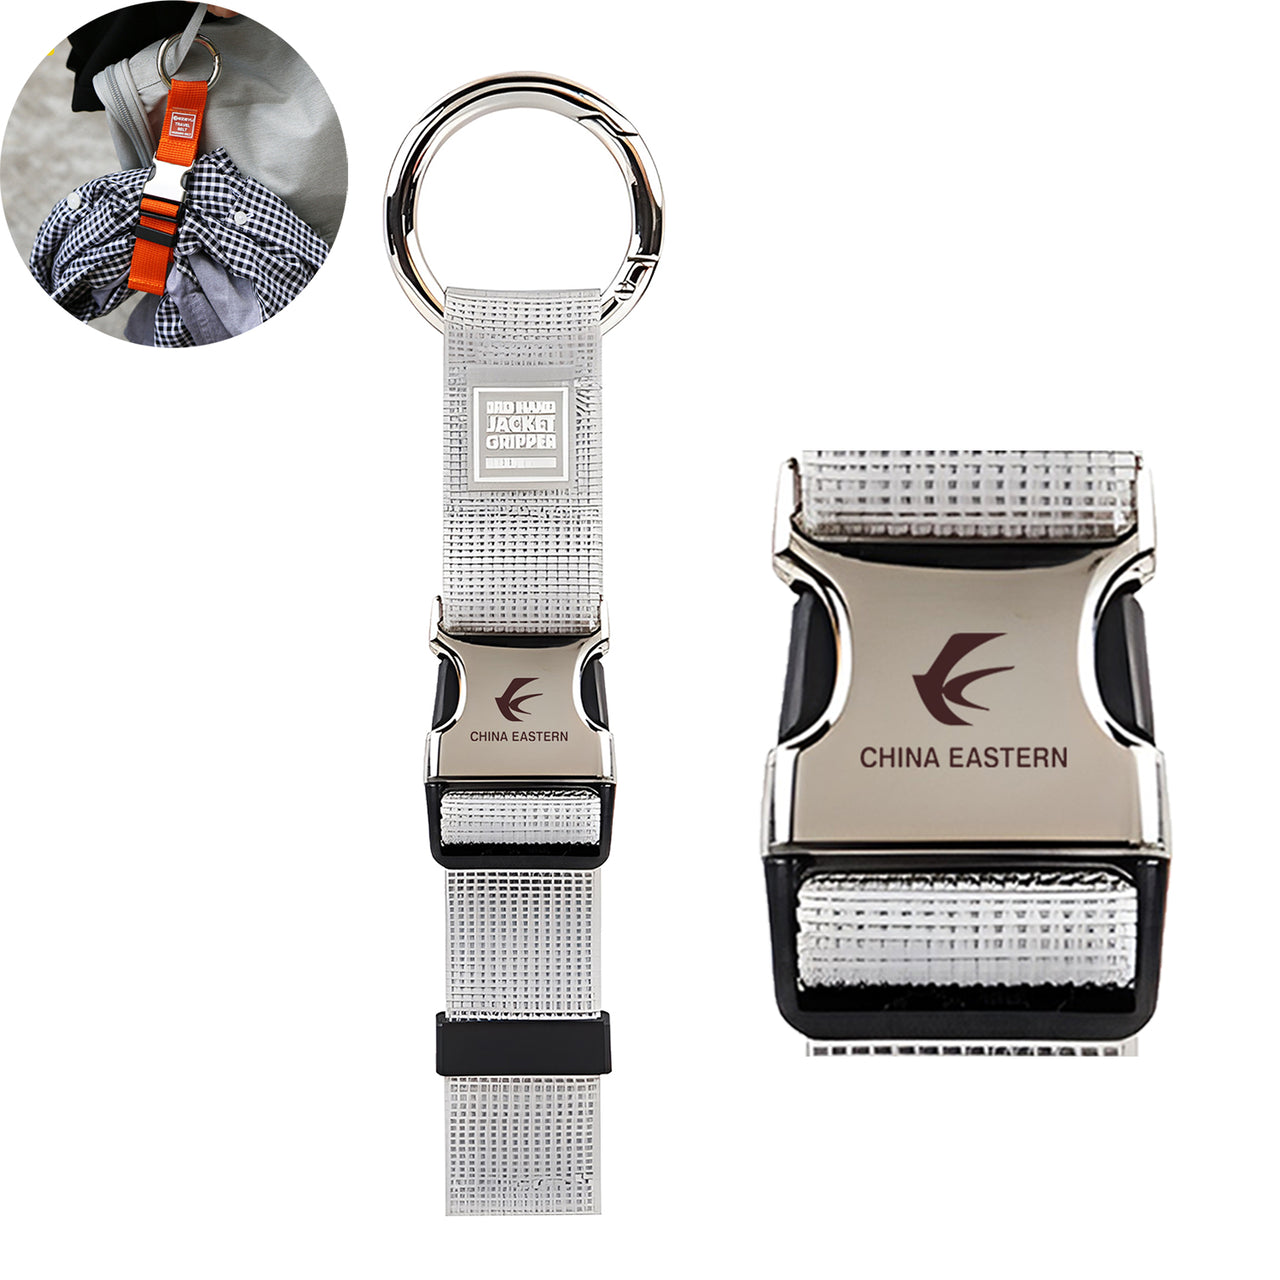 China Eastern Airlines Designed Portable Luggage Strap Jacket Gripper